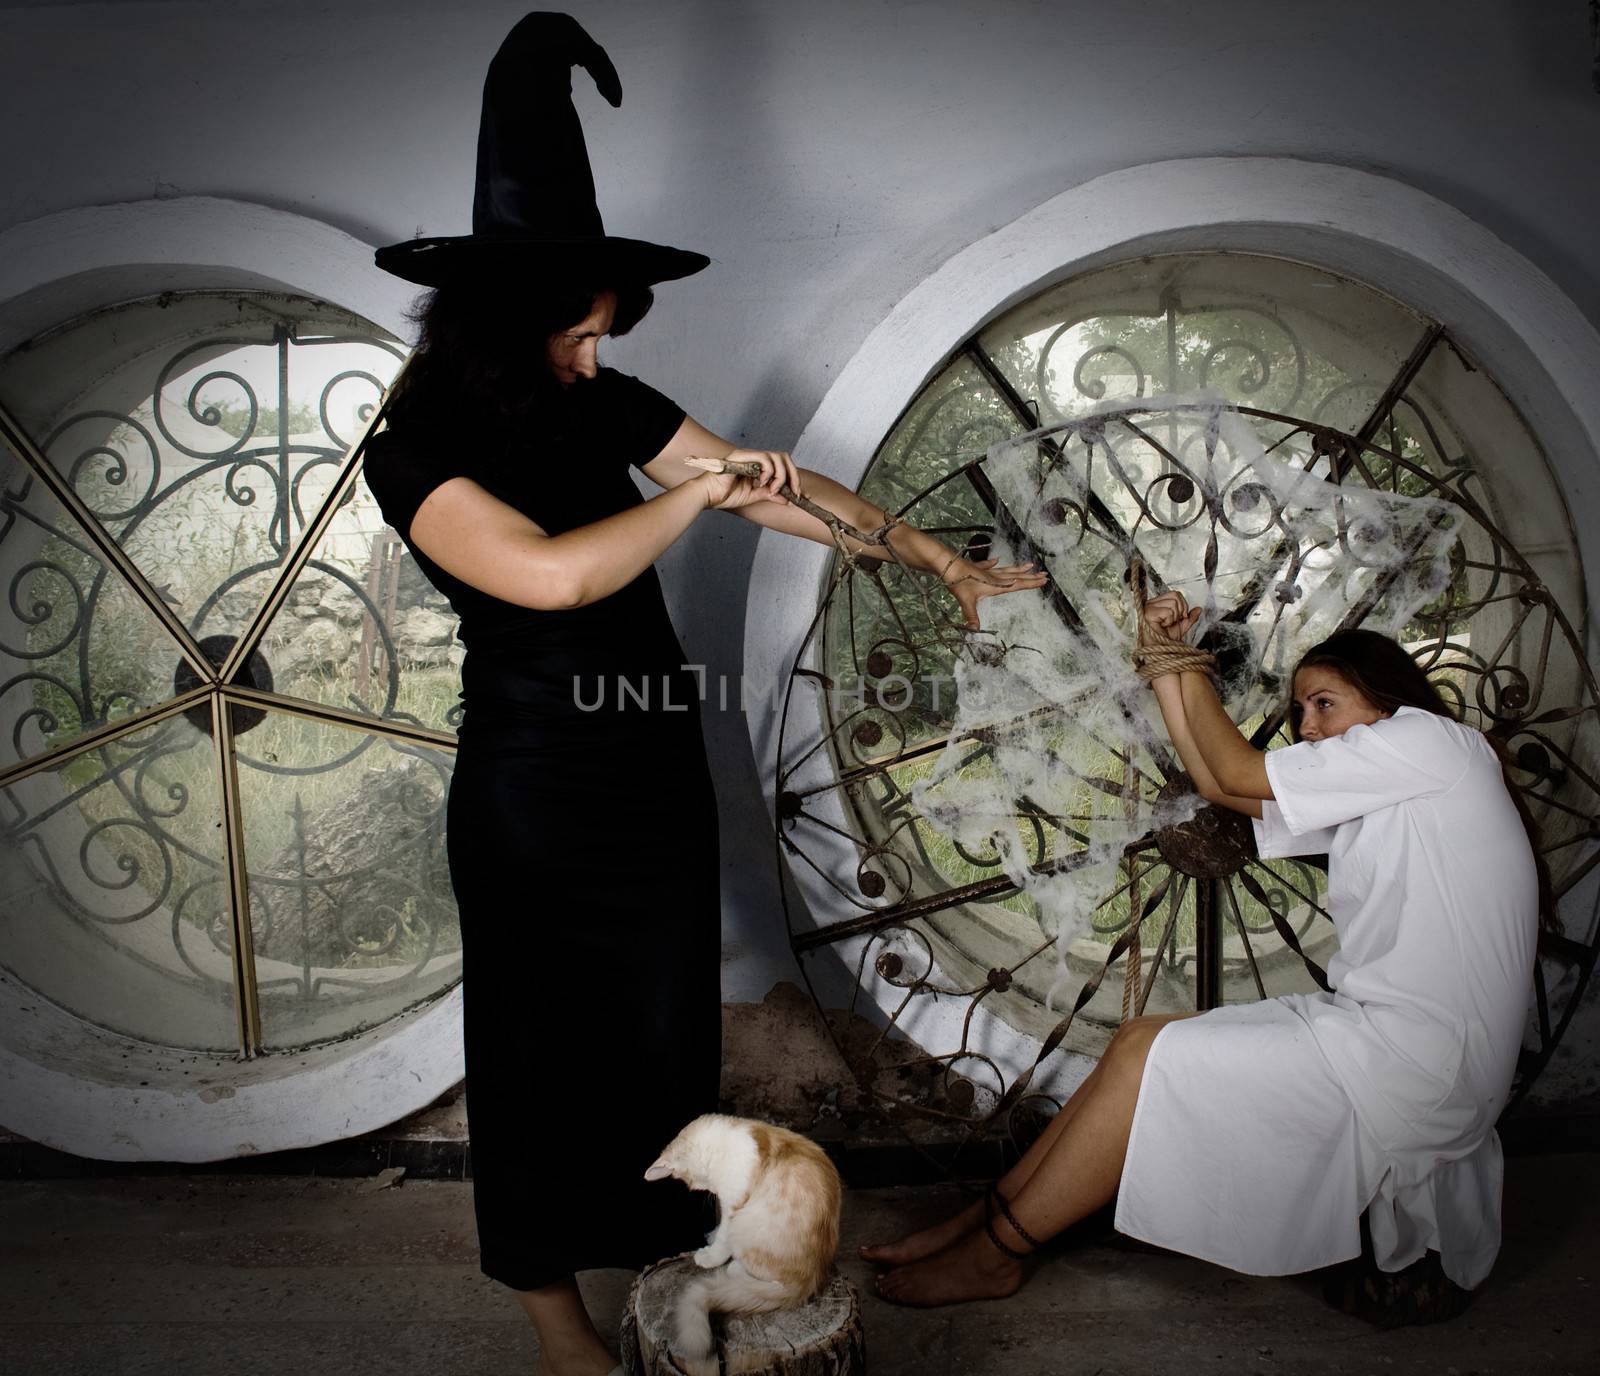 The evil witch tries to conjure fairy godmother